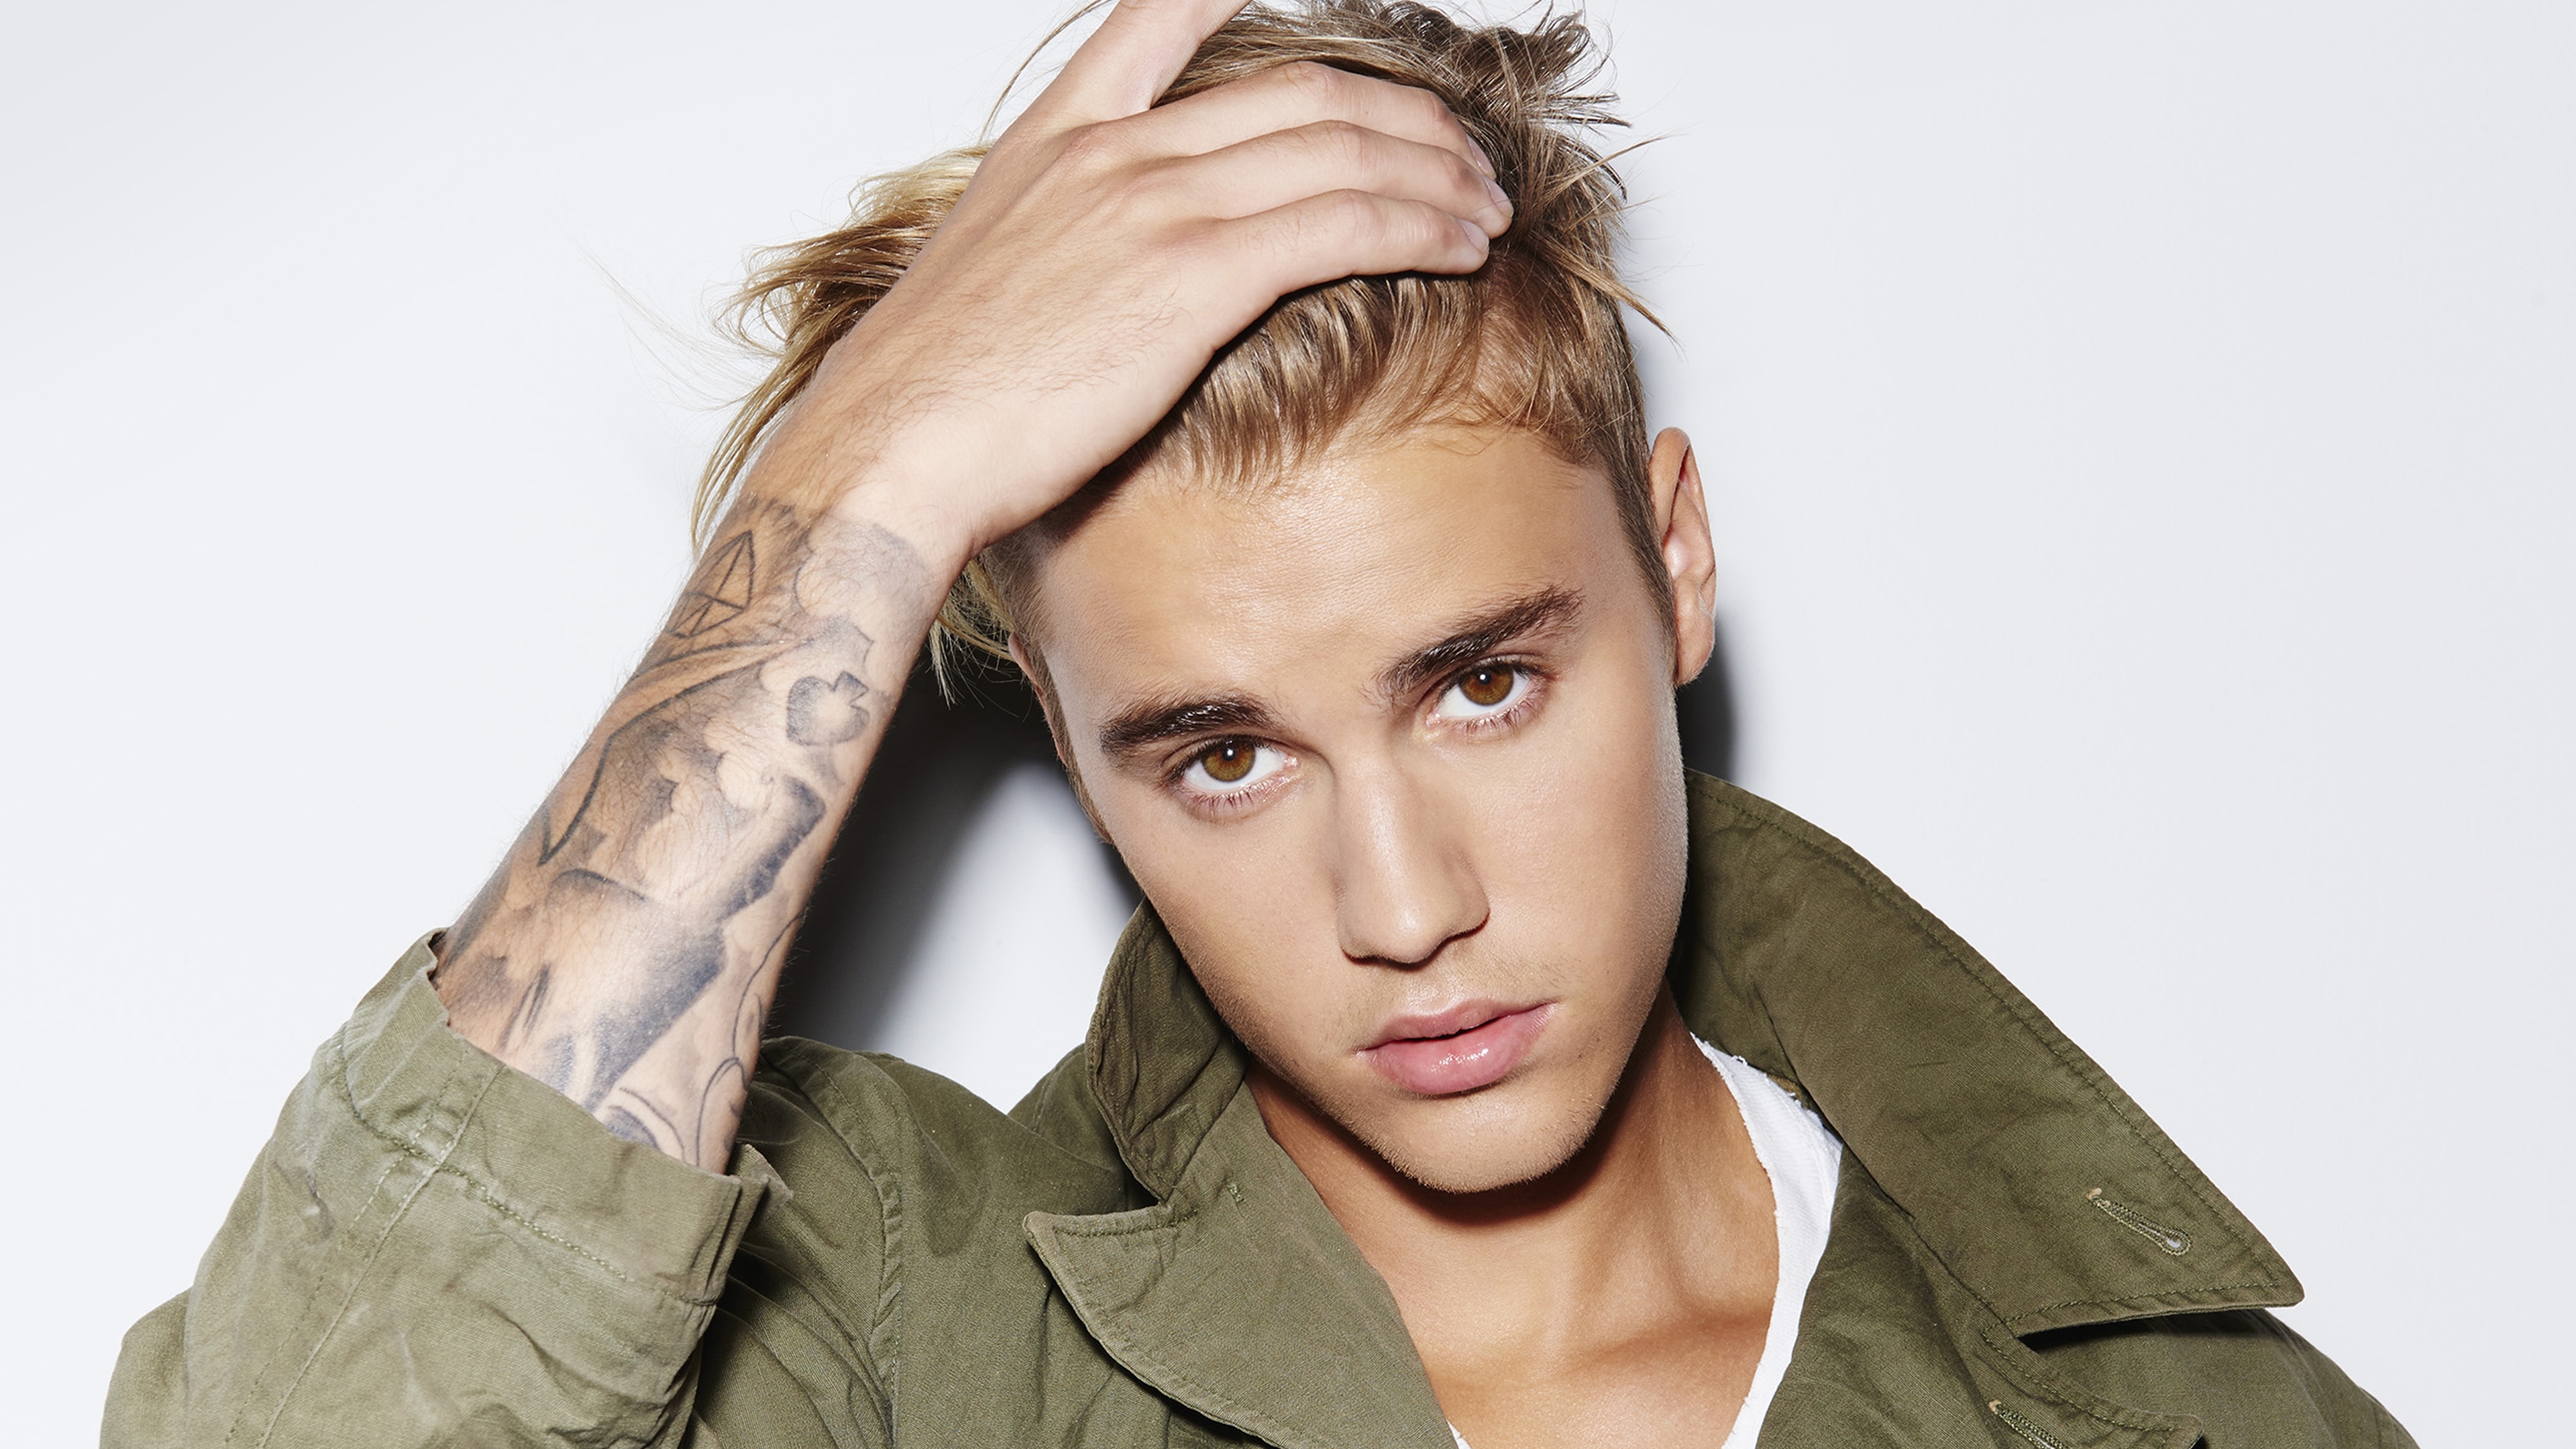 10 Best Pictures Of Justin Bieber 2016 FULL HD 1920×1080 For PC Desktop